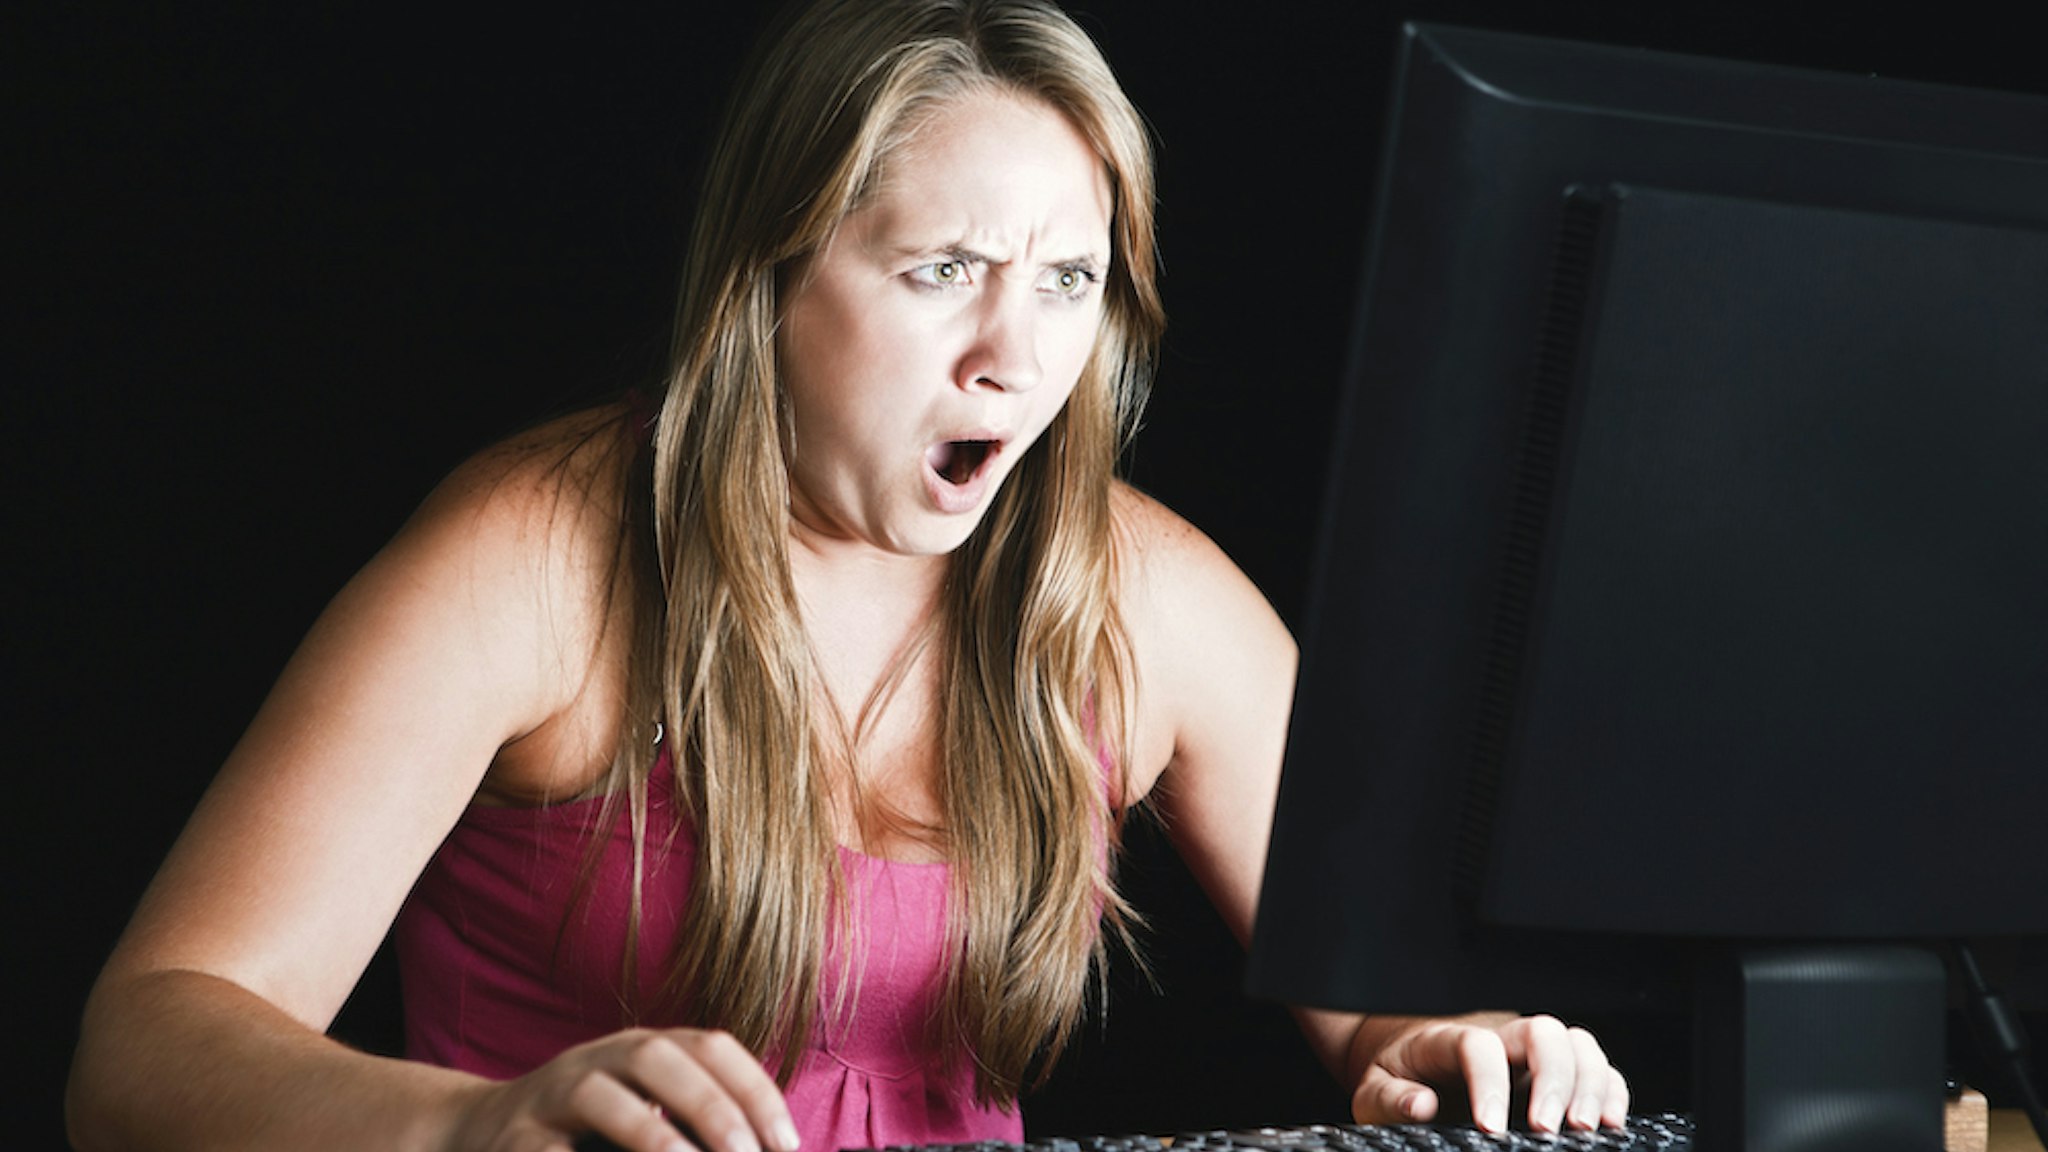 Shocked woman stares at computer screen. (RapidEye via Getty Images)